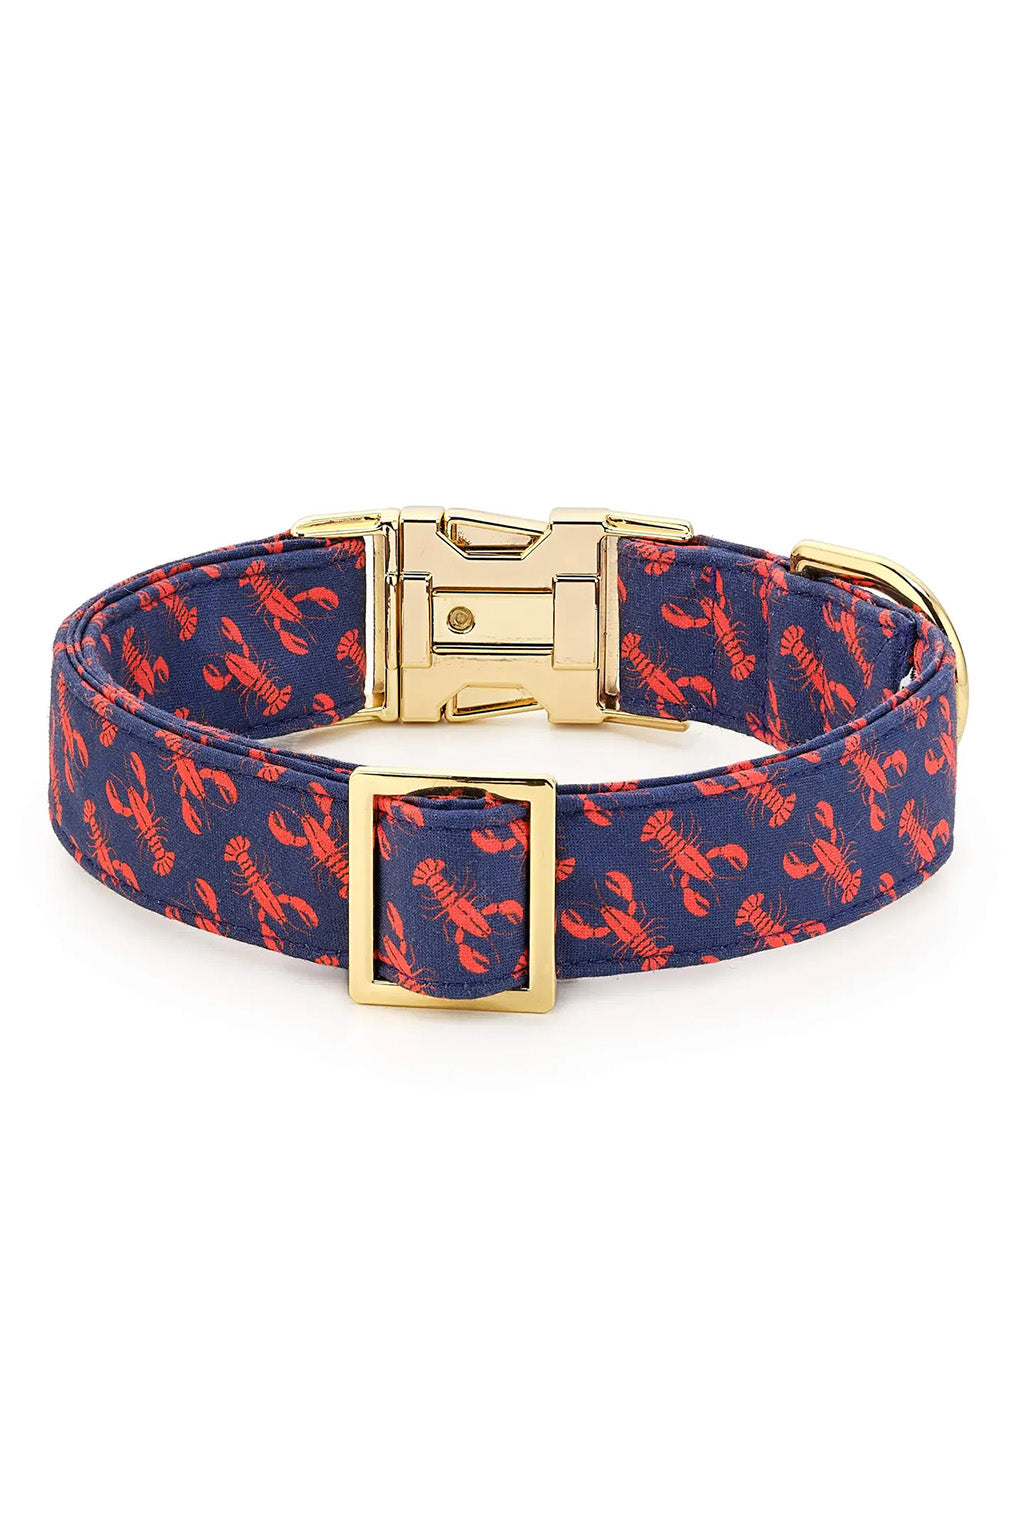 CATCH OF THE DAY NAVY DOG COLLAR